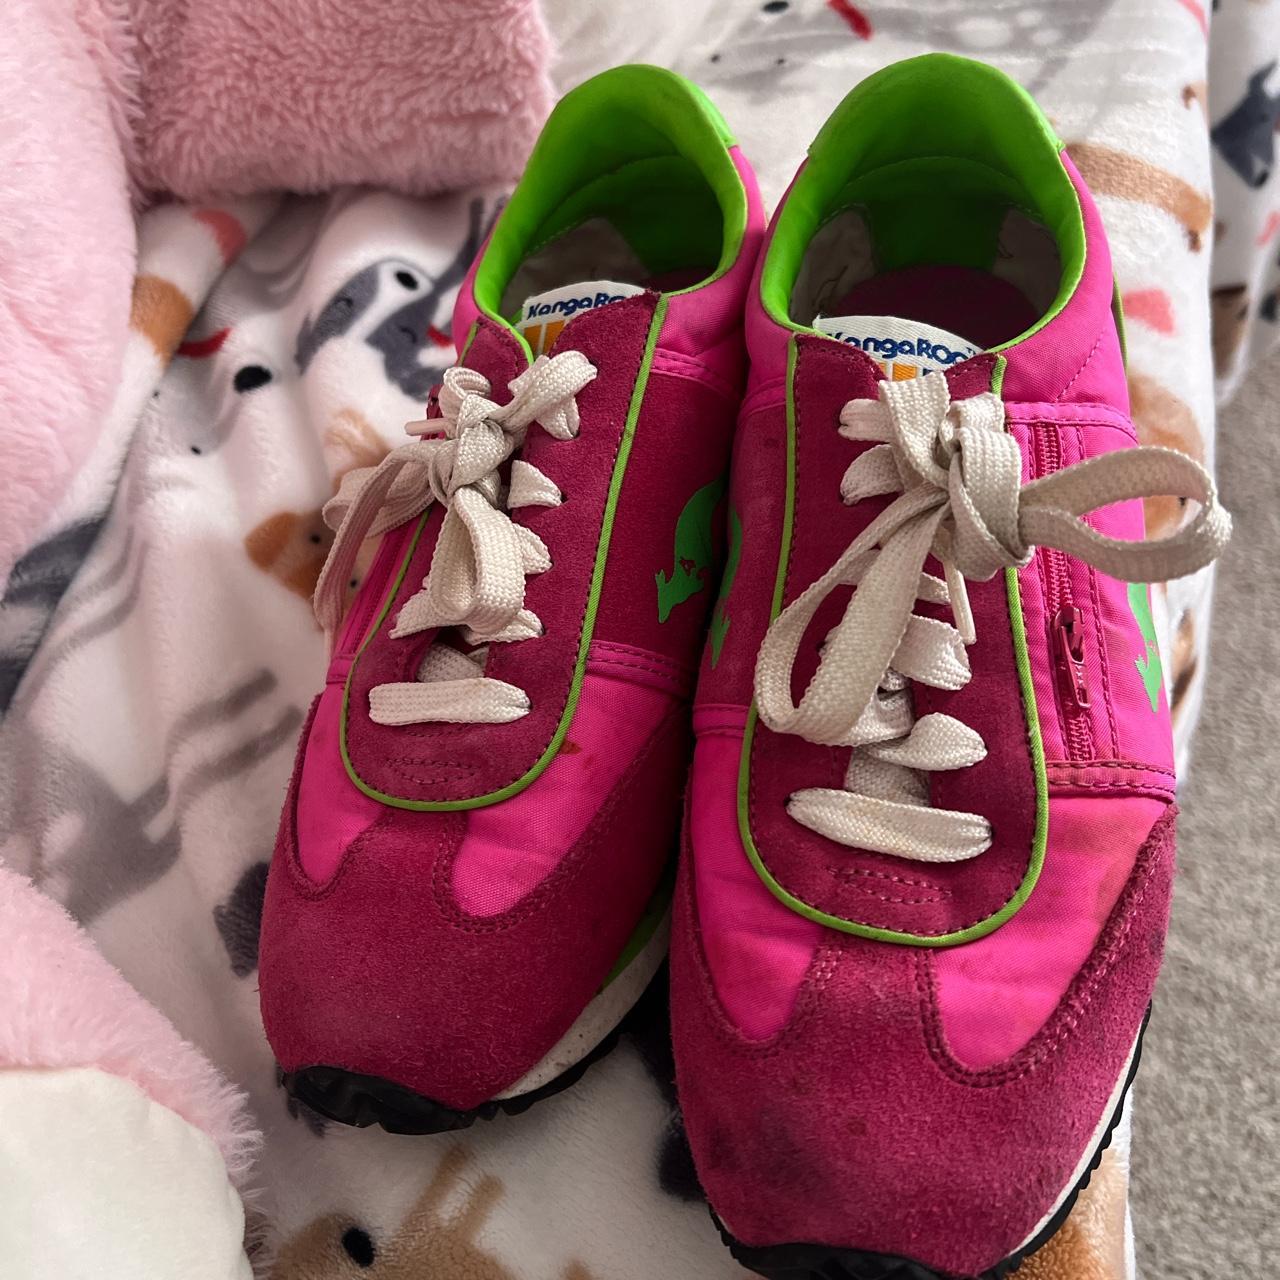 KangaROOS Women's Pink and Green Trainers (4)